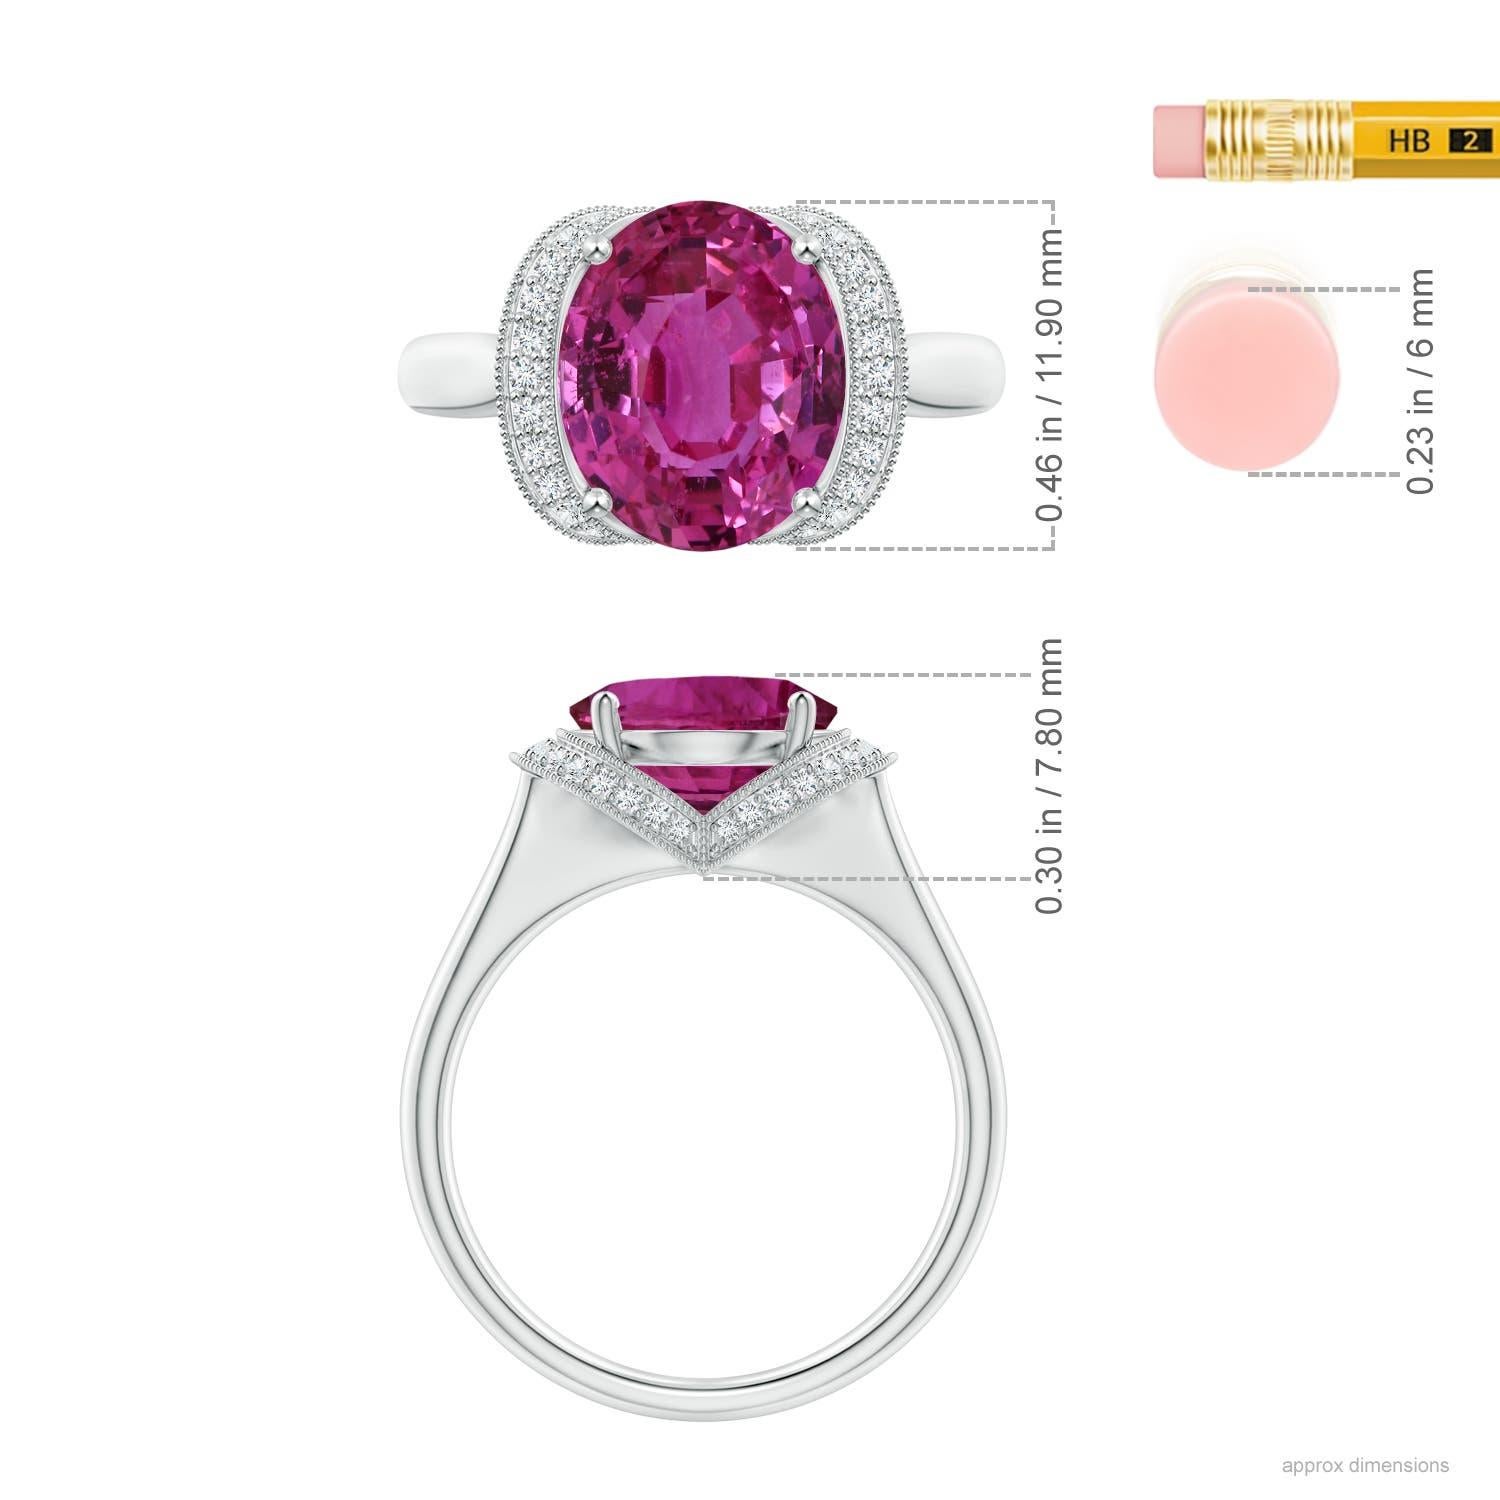 For Sale:  Angara Gia Certified Pink Sapphire Ring in Platinum with Diamond Half Halo 4